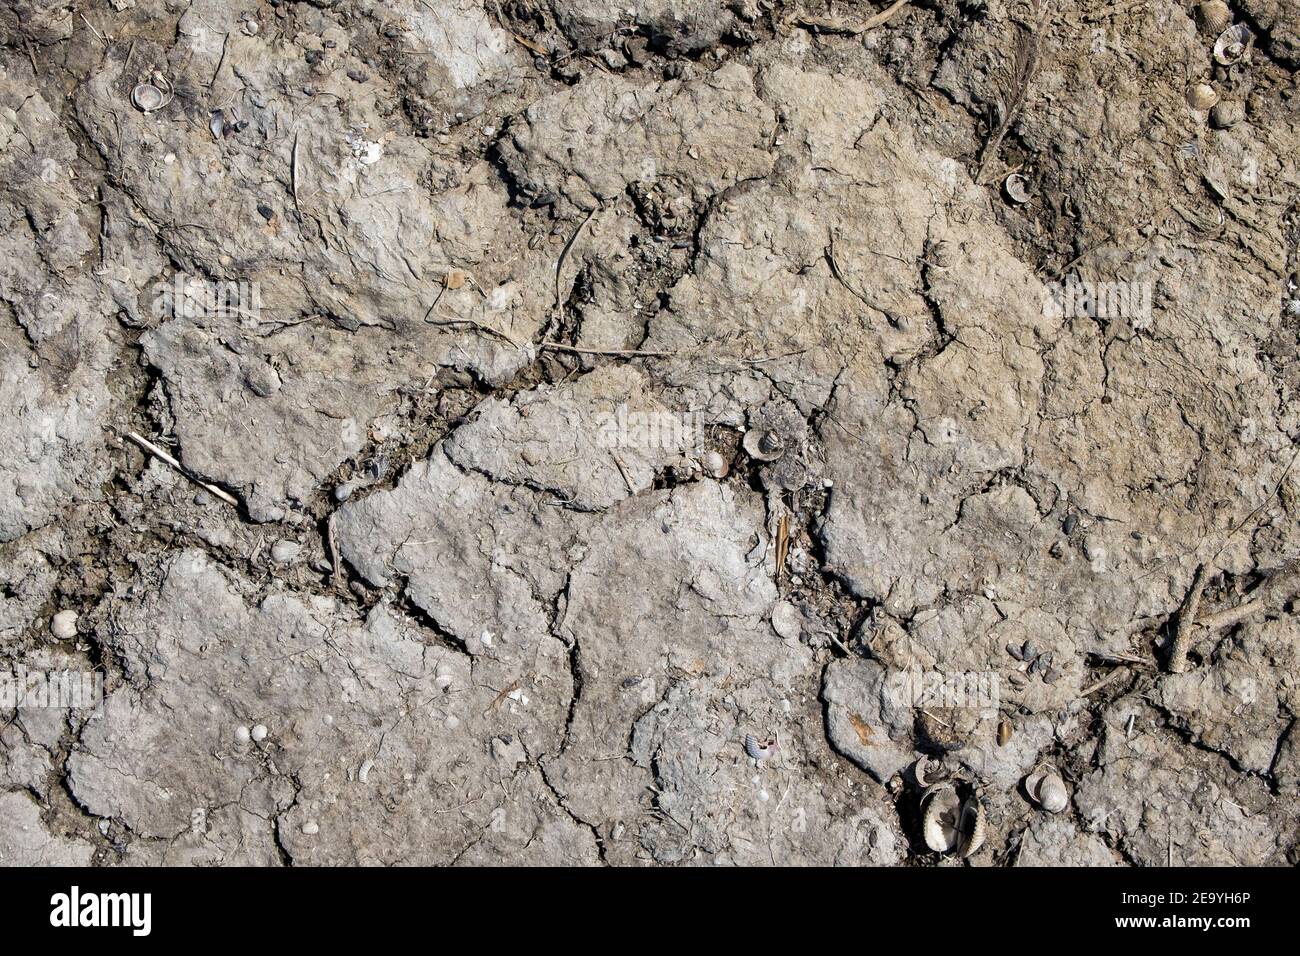 Surface of cracked dry soil with a high salt content Stock Photo